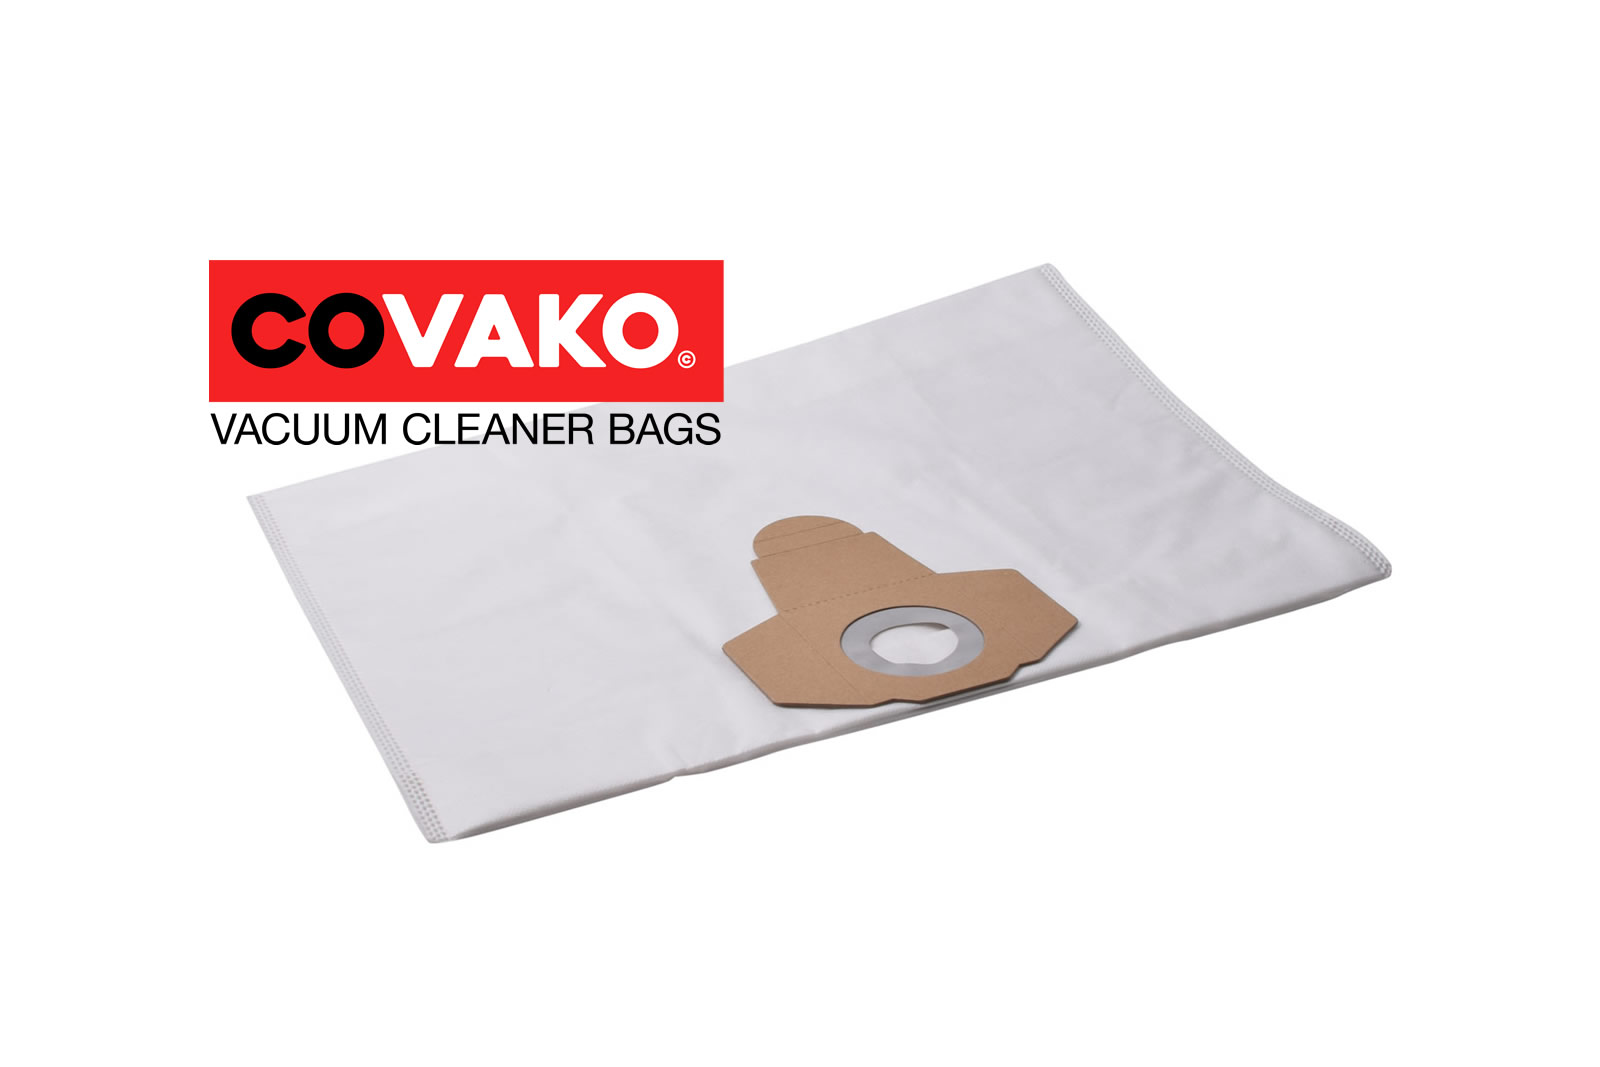 Einhell TC-VC 1825 / Synthesis - Einhell vacuum cleaner bags